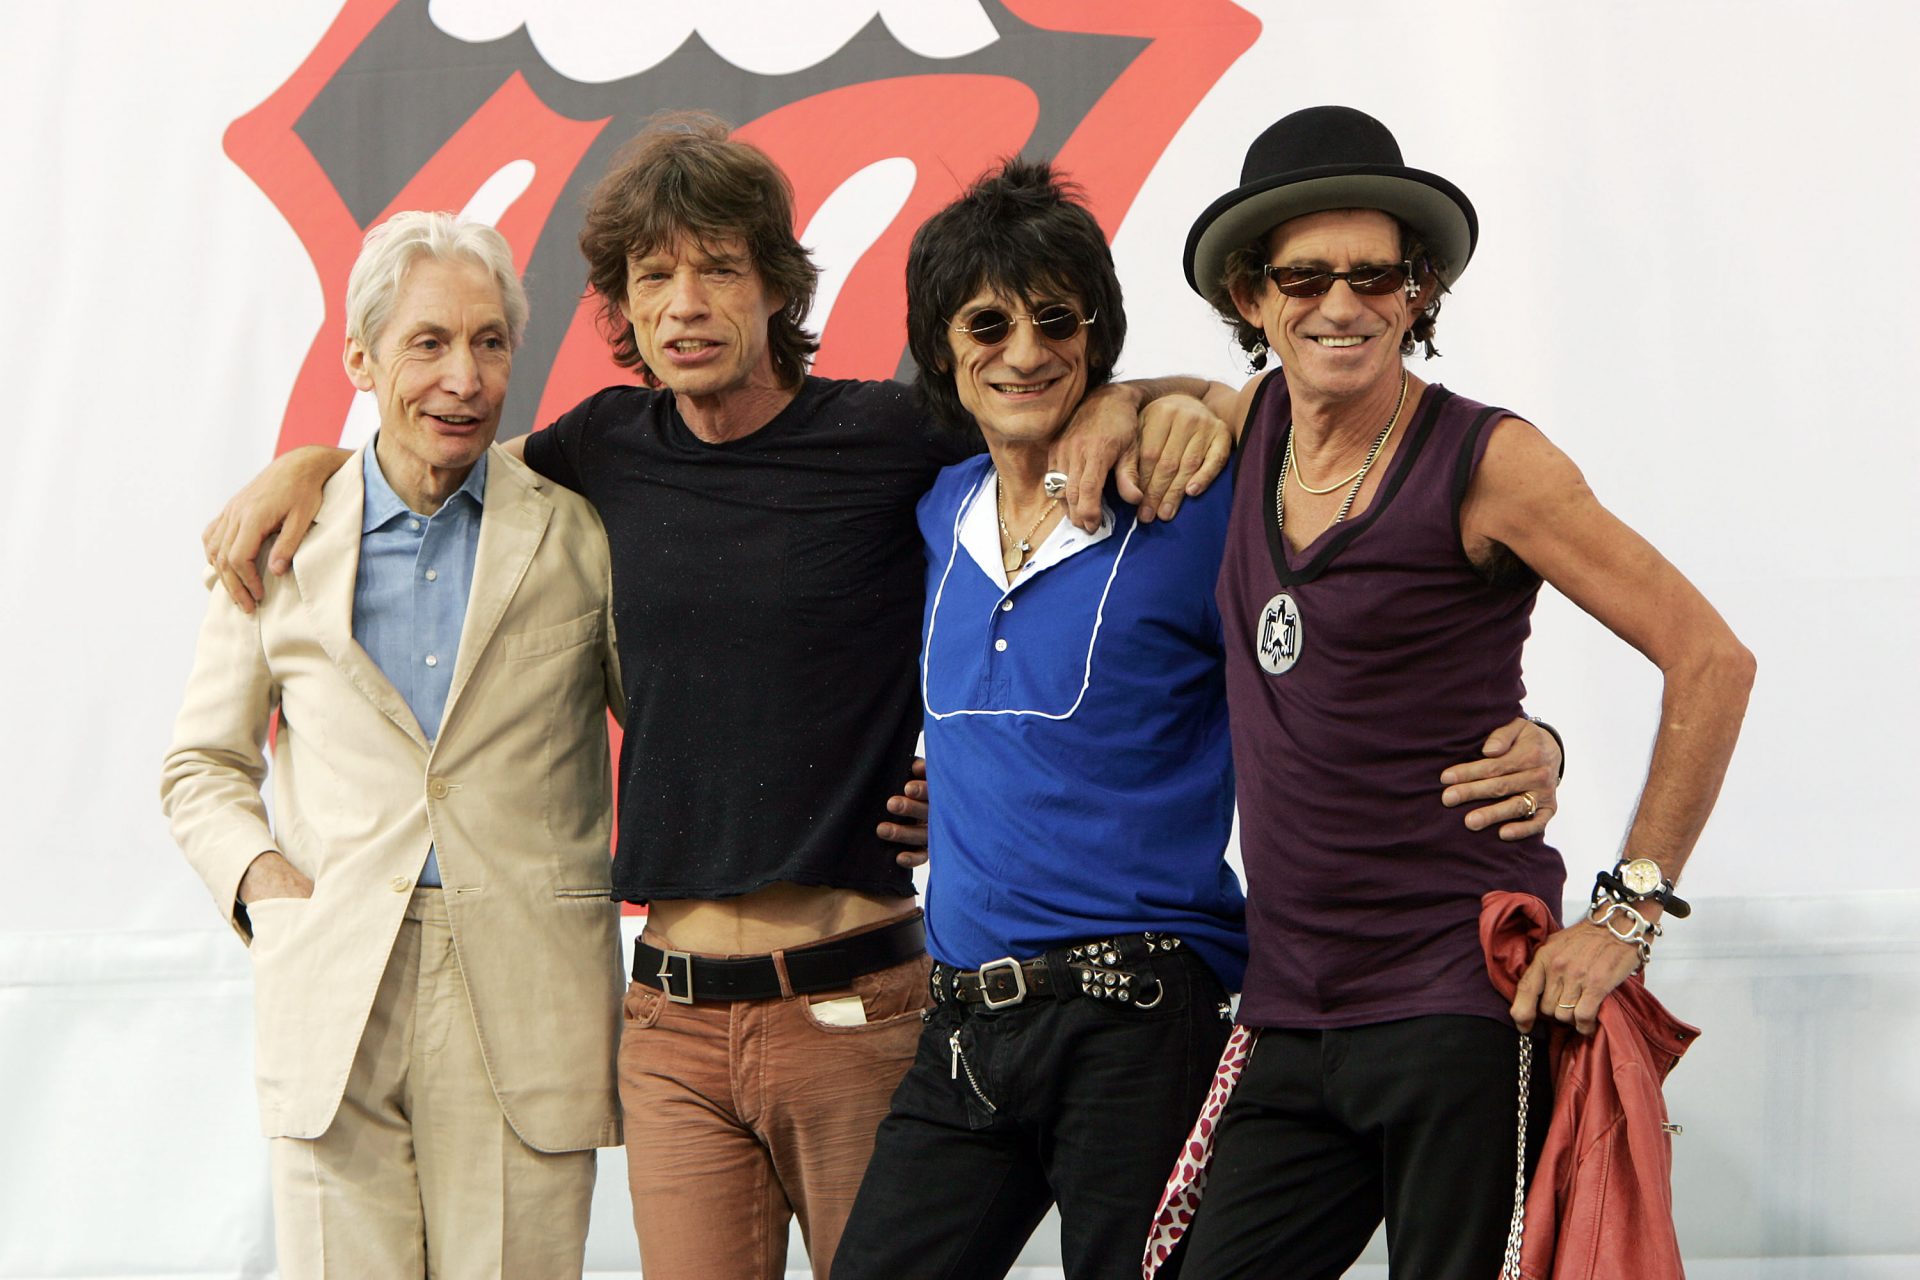 The Rolling Stones, one of the most influential bands ever